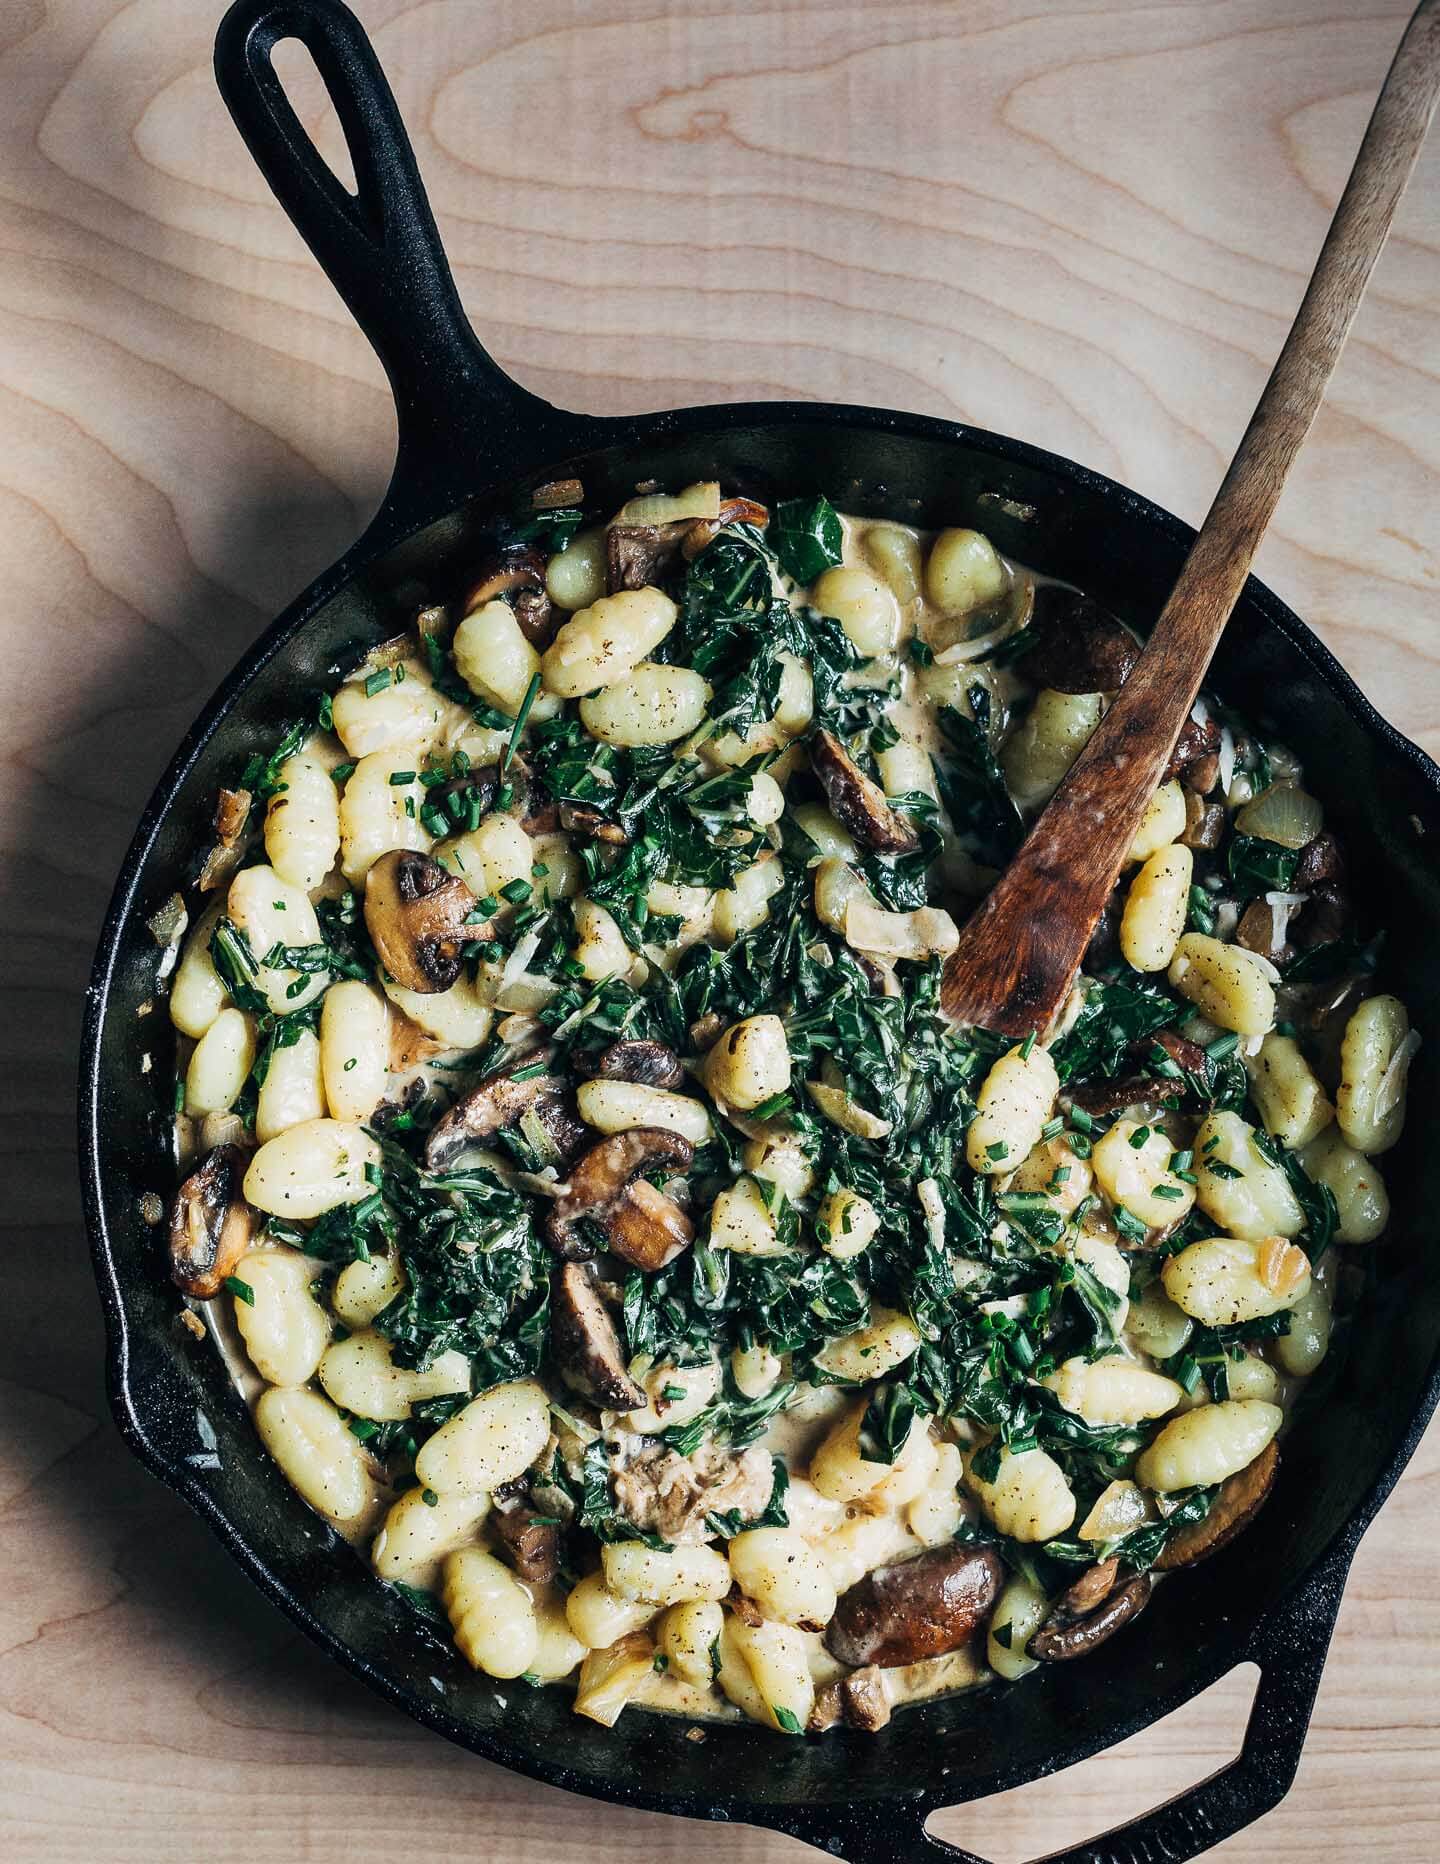 A weeknight recipe with showoff vibes, this creamy mushroom and greens gnocchi features umami-rich mushrooms, tender collard greens, and pillowy gnocchi in a velvety Parmesan and cream sauce. 